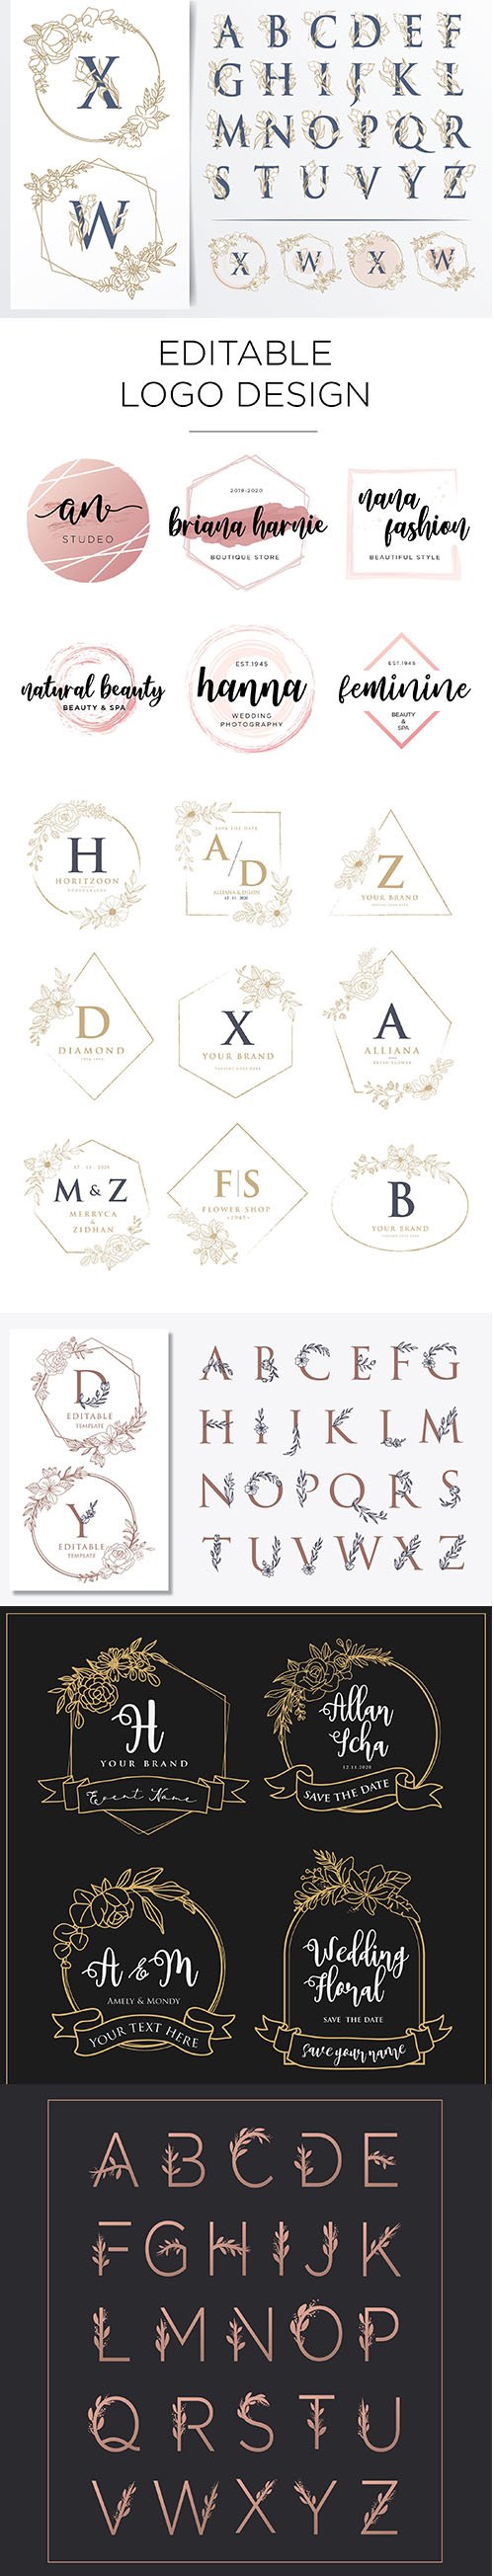 Collection of Wedding Logo Designs with Floral